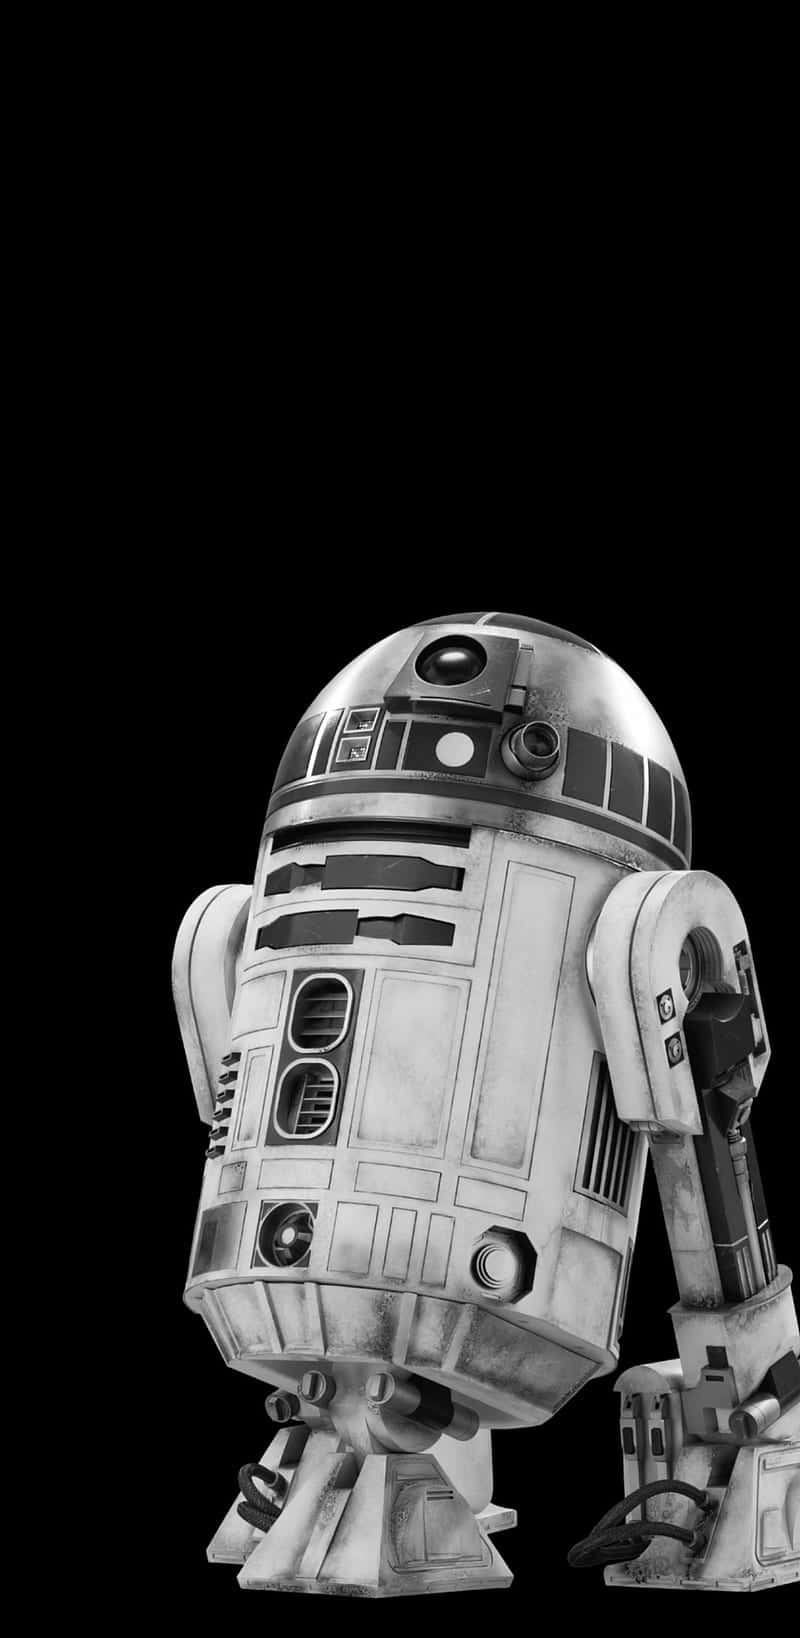 The iconic R2-D2 robot character from Star Wars Wallpaper